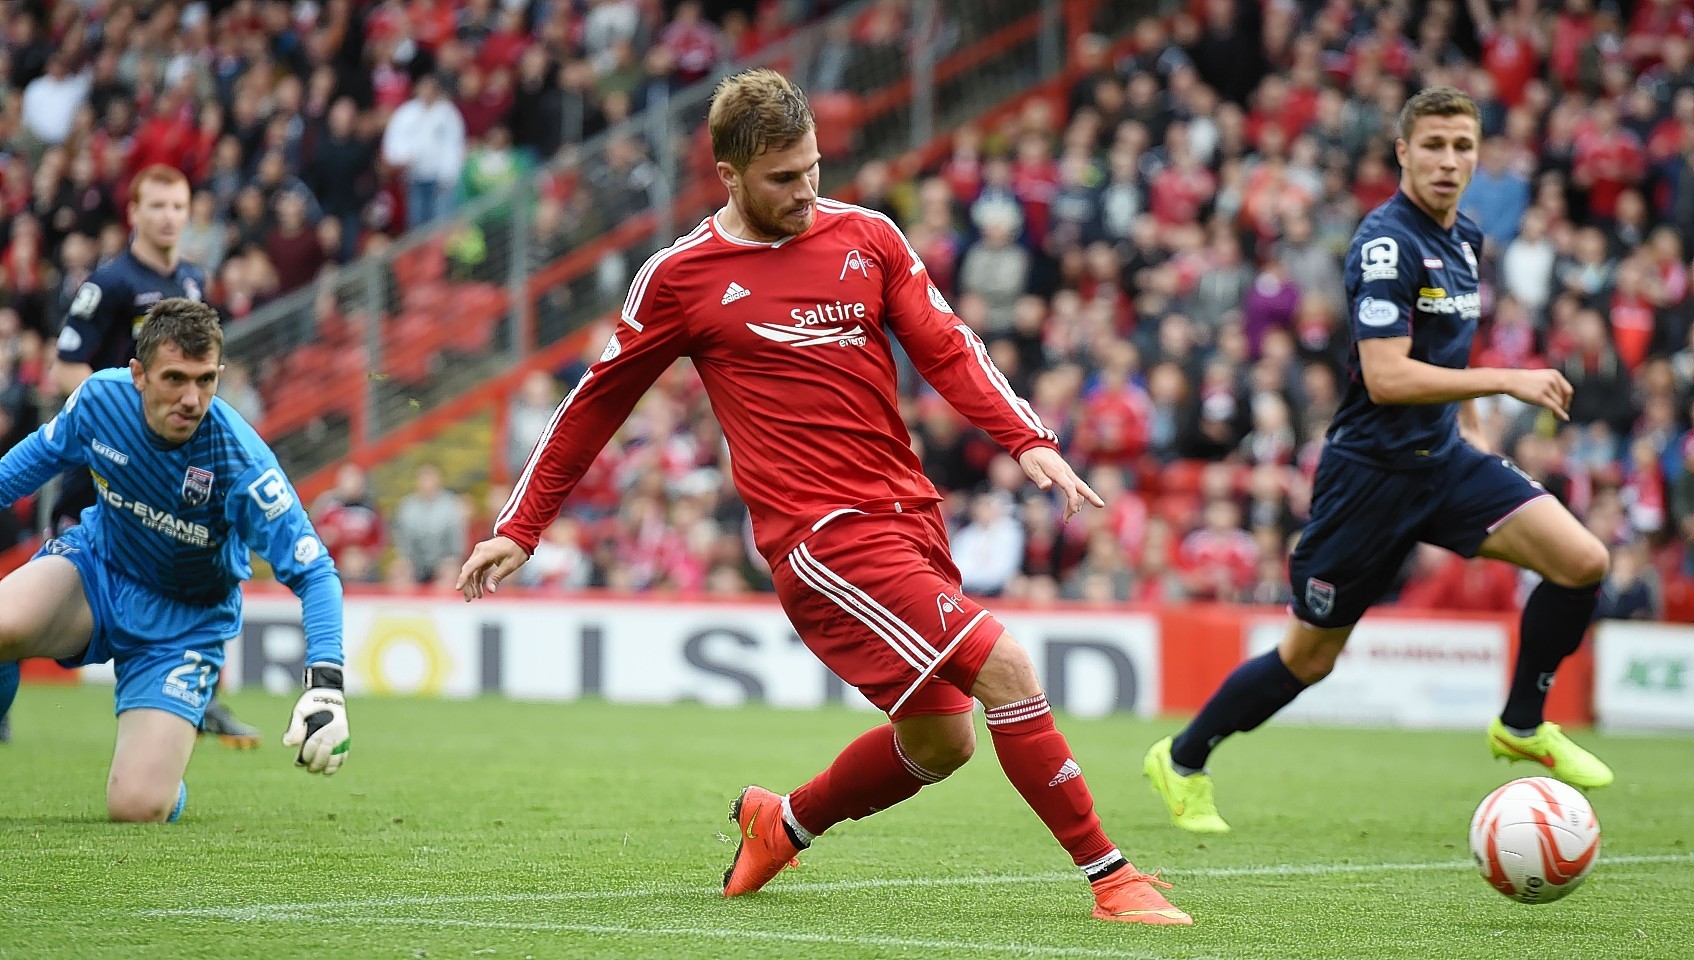 Goodwillie missed an open goal but still deserved his man of the match award and received plenty of praise from Dons fans online